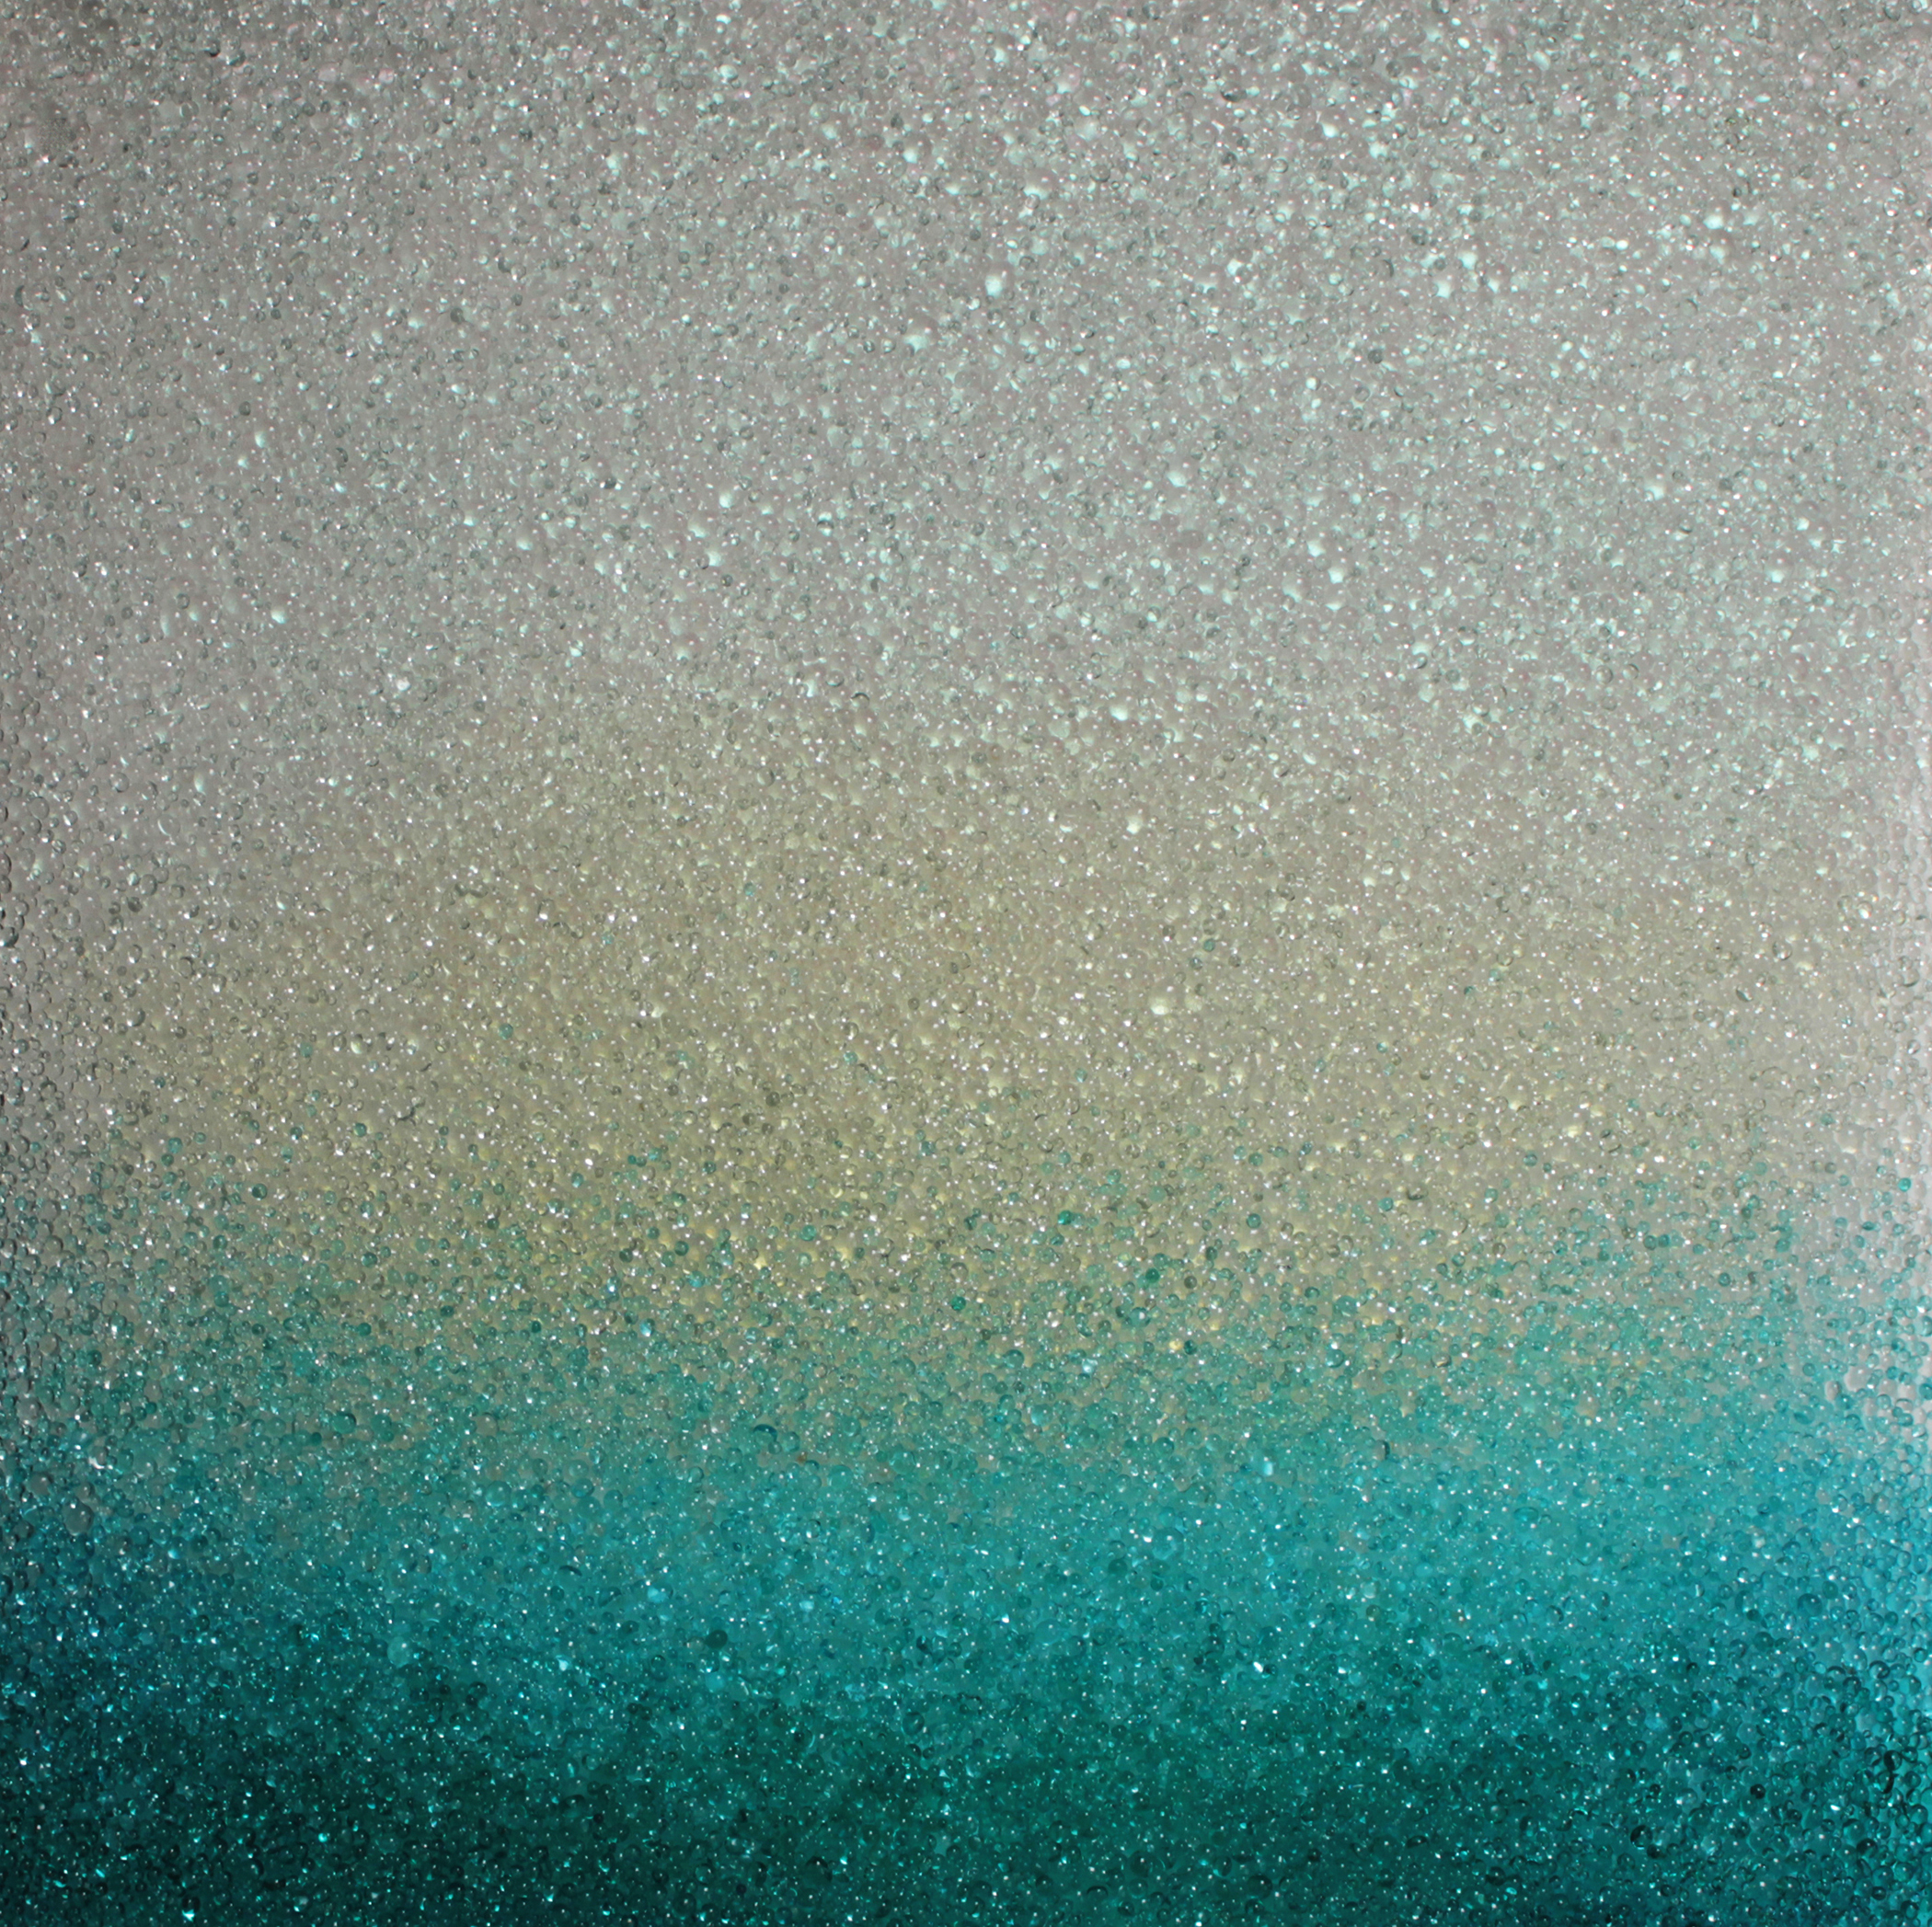 "Turquoise Glimmer," 2018, kiln formed glass, iridescent pigment, 22 x 22 inches